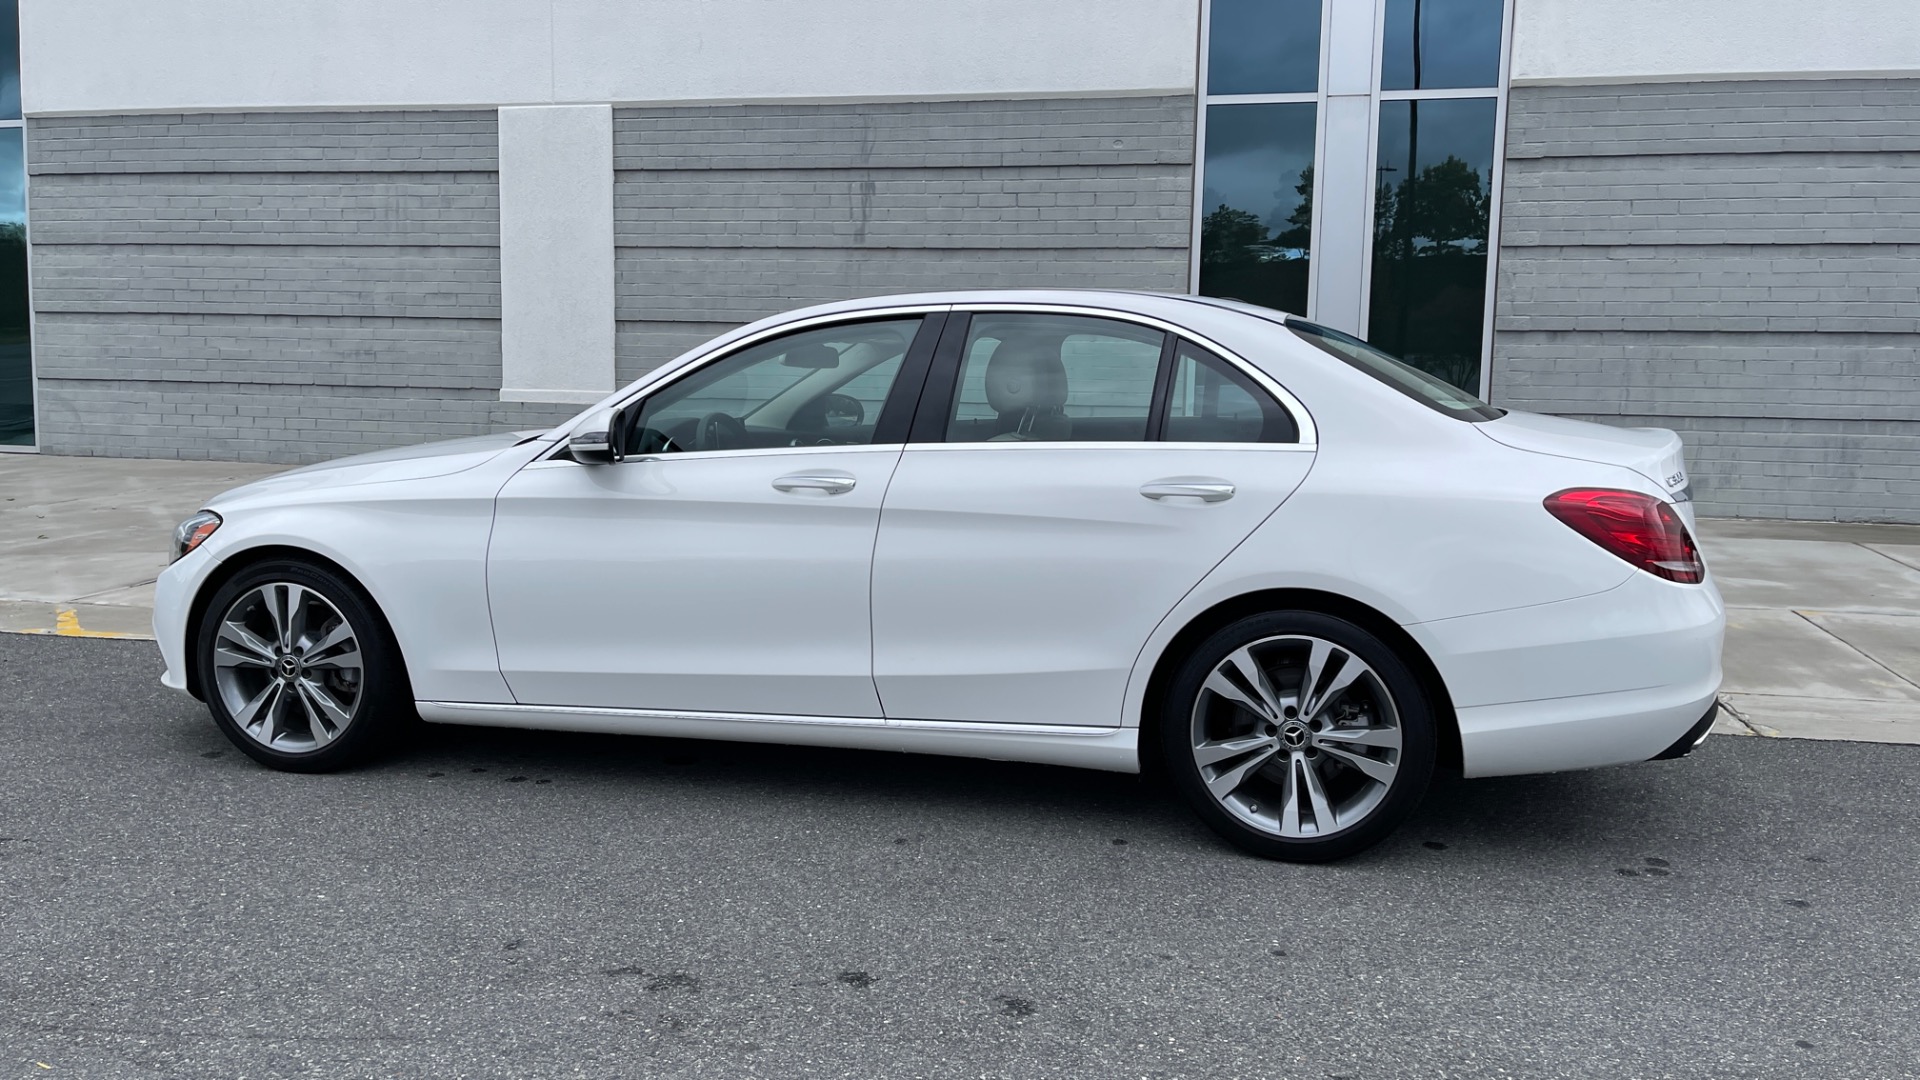 Used 2018 Mercedes-Benz C-Class C 300 / PREMIUM PACKAGE / 18IN WHEELS / HEATED FRONT SEATS / LED HEADLIGHTS for sale Sold at Formula Imports in Charlotte NC 28227 2